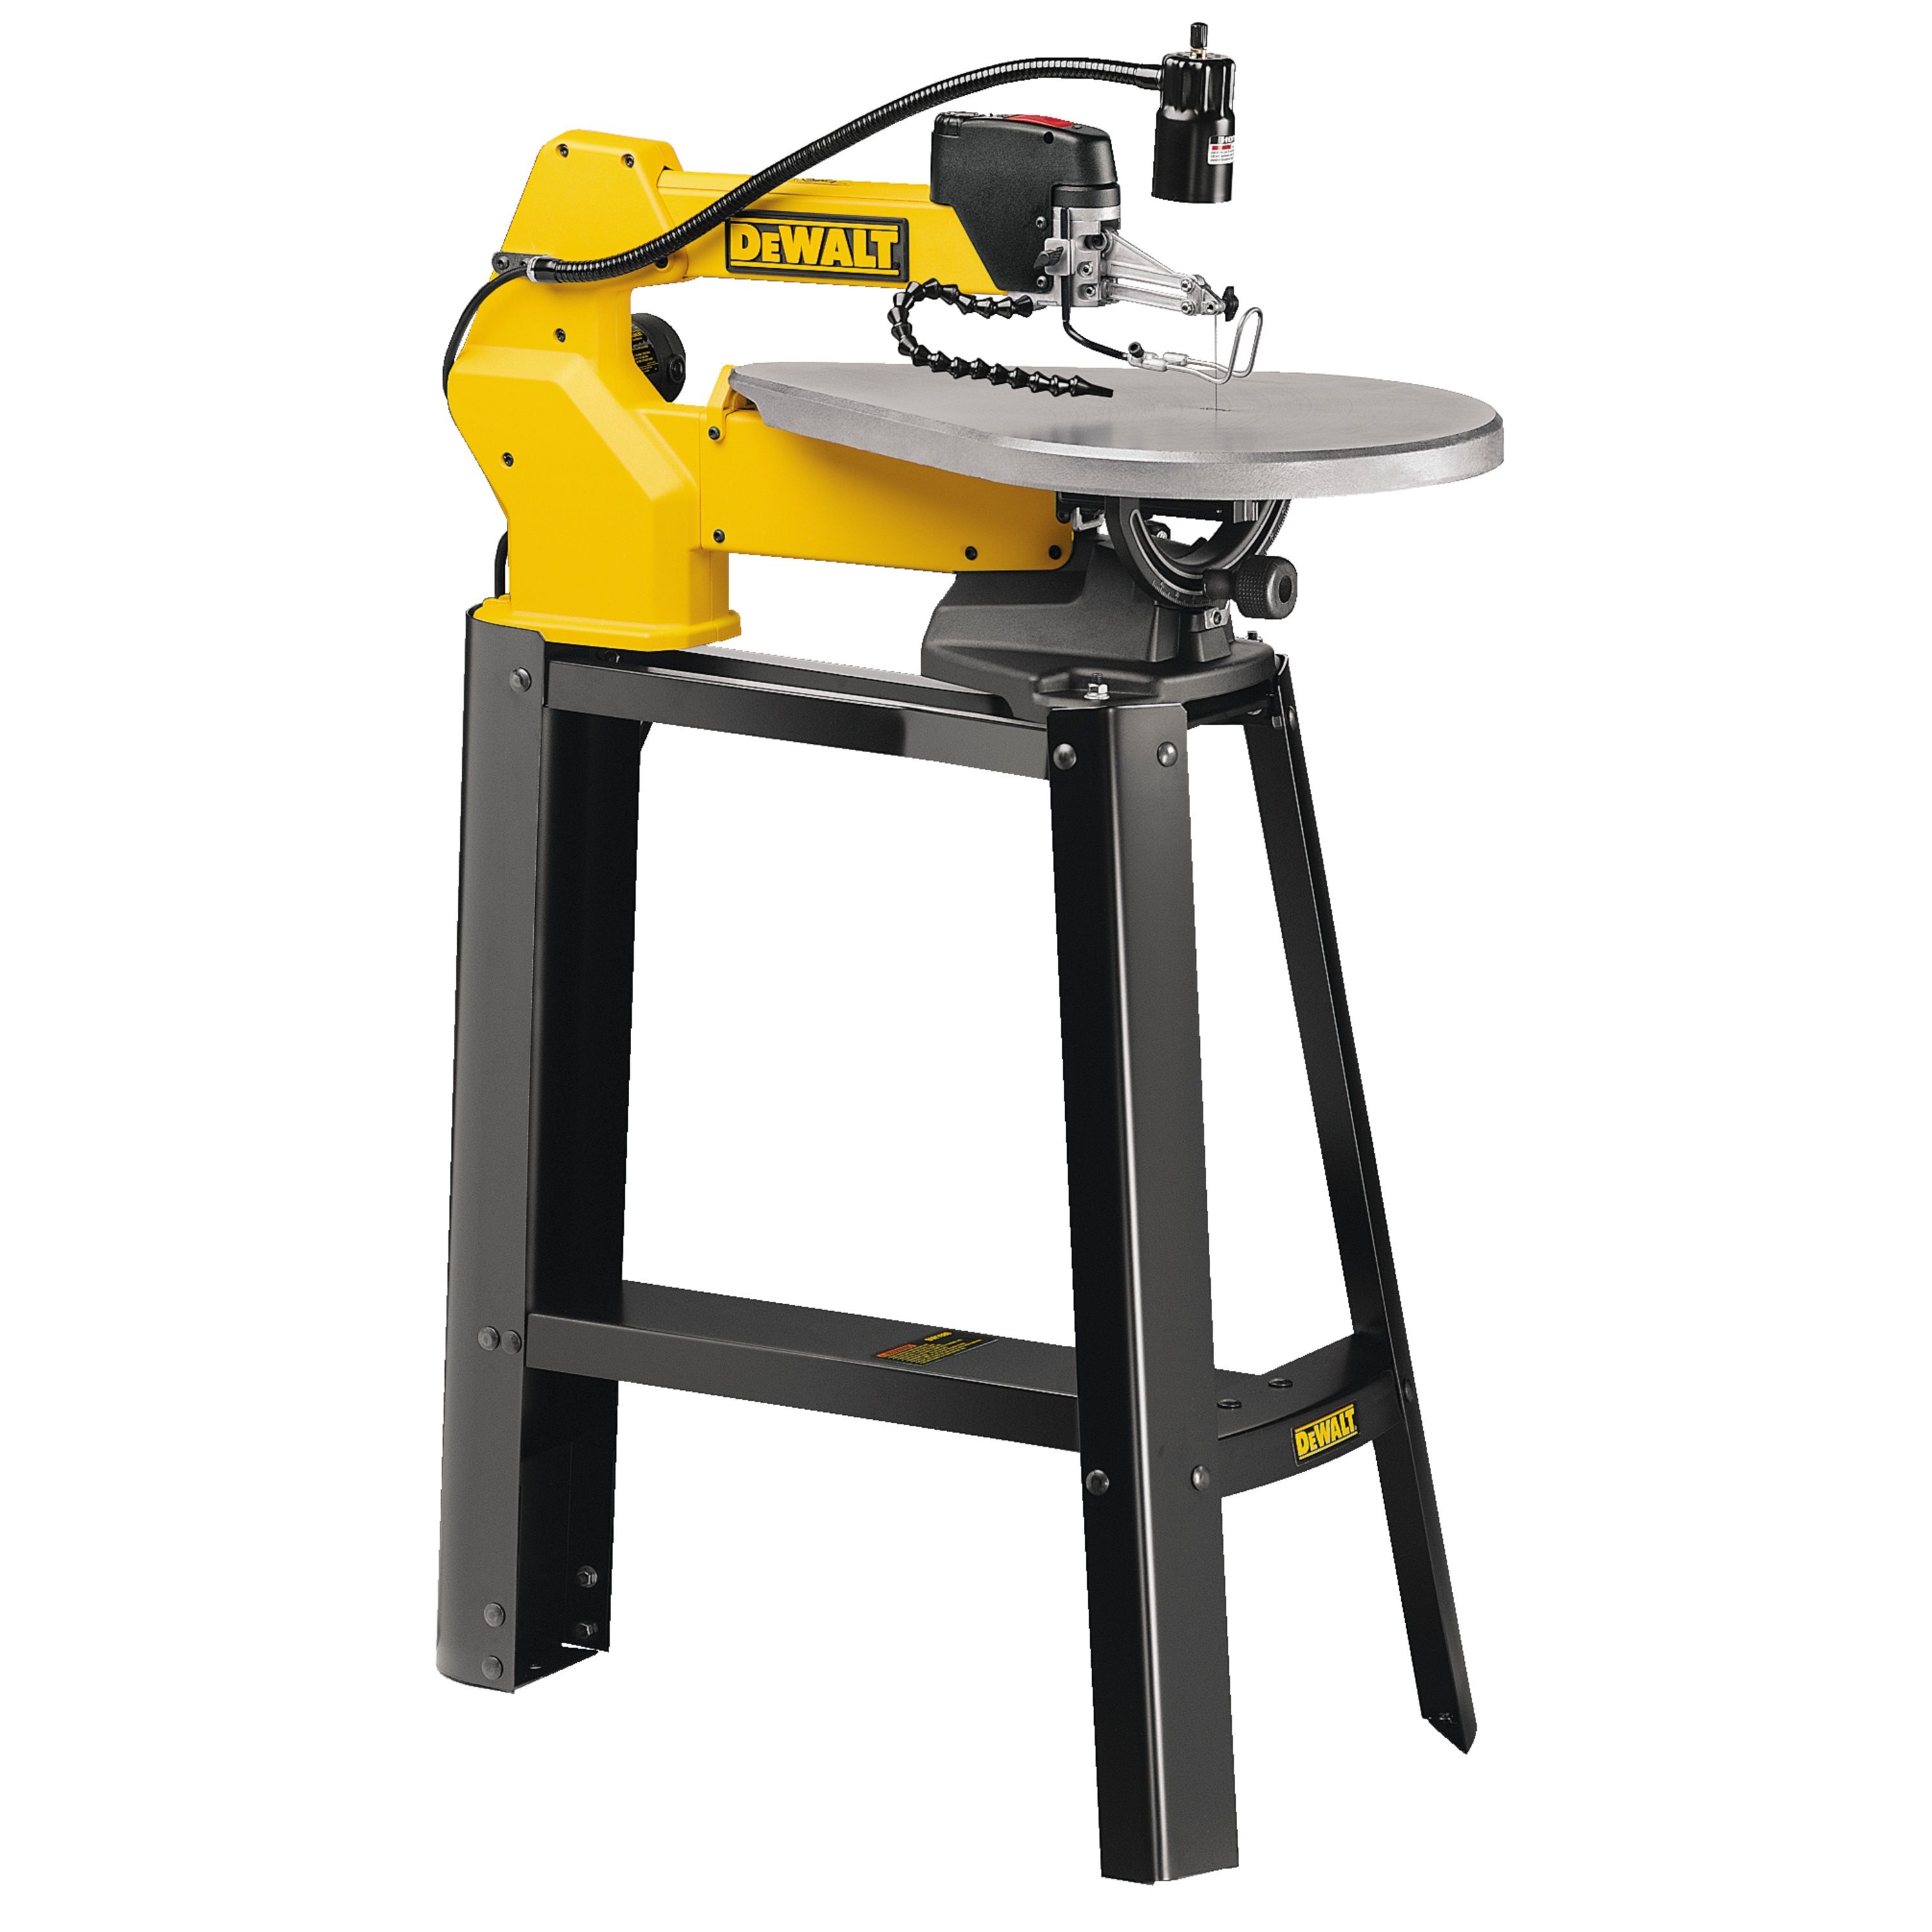 20 inch Variable Speed Scroll Saw on table with worklight attached.